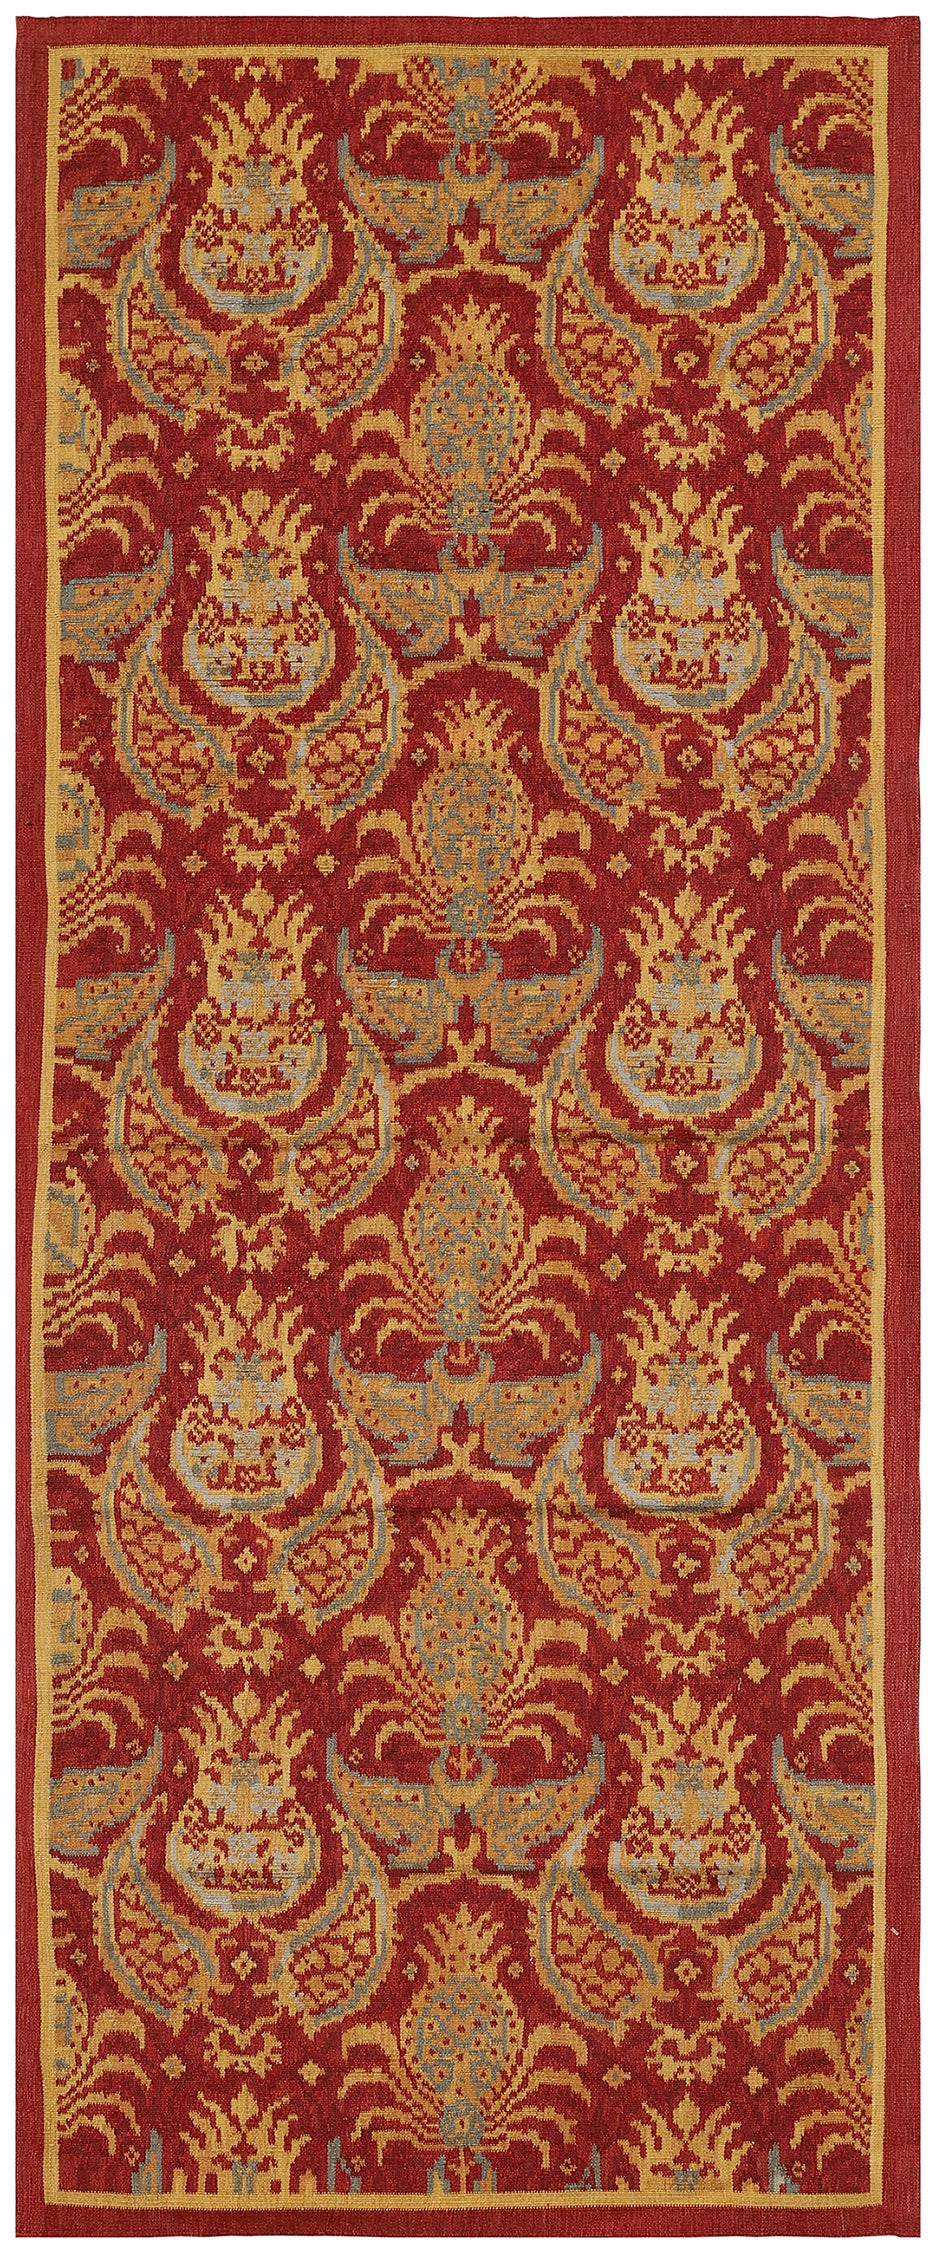 4'x9' Red Sage Gold Pineapple Design Bessarabian Quality Contemporary Ariana Kilim Collection Runner Rug